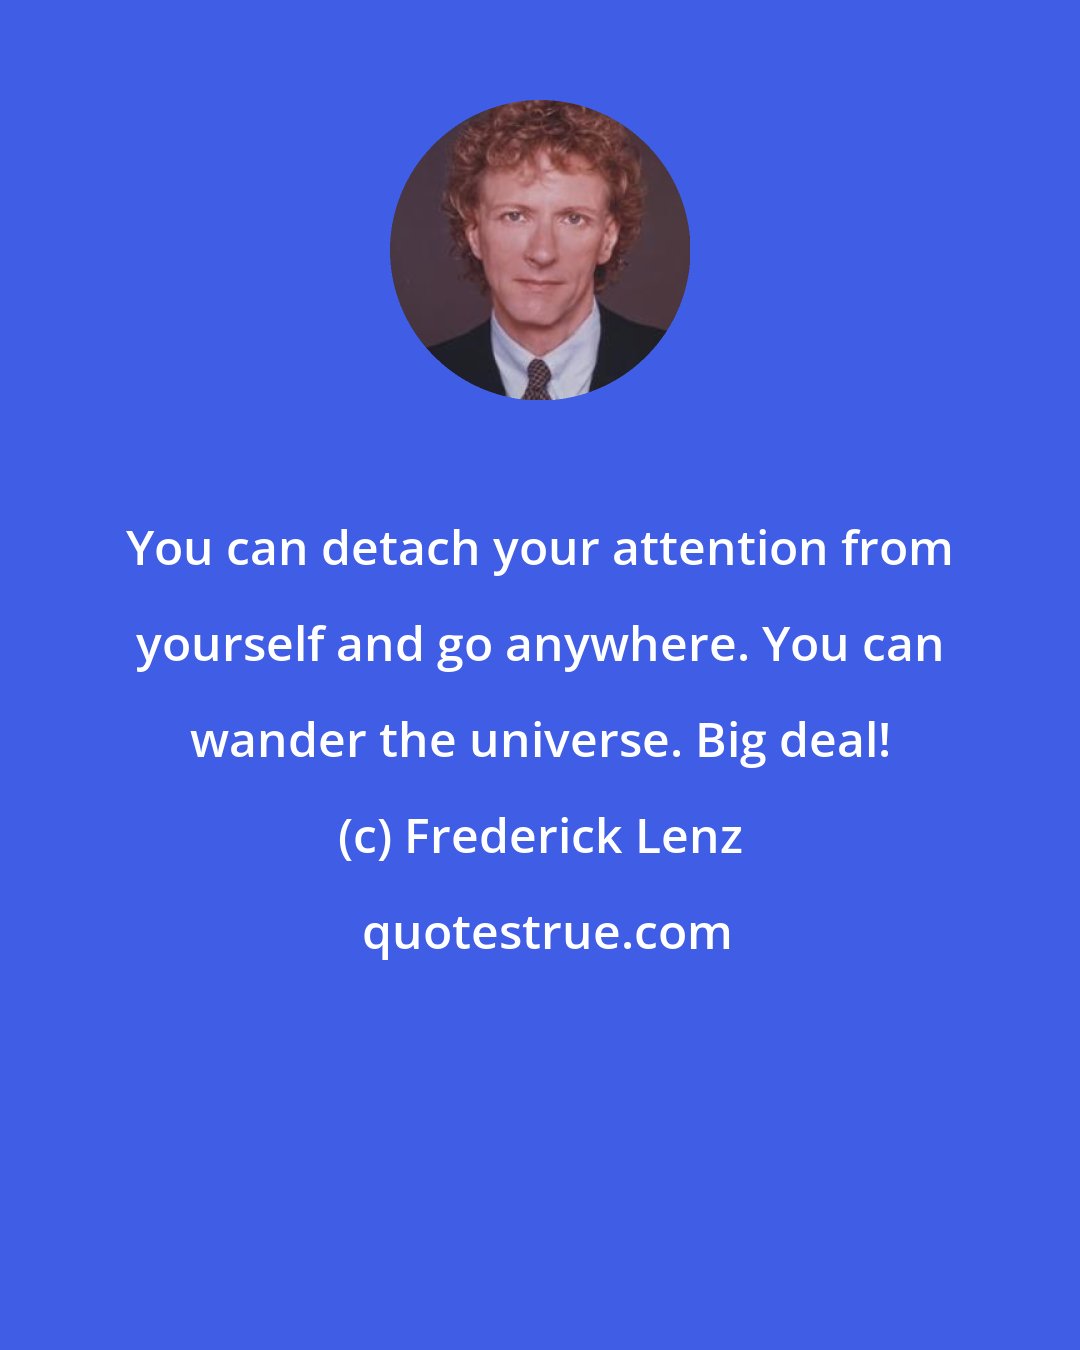 Frederick Lenz: You can detach your attention from yourself and go anywhere. You can wander the universe. Big deal!